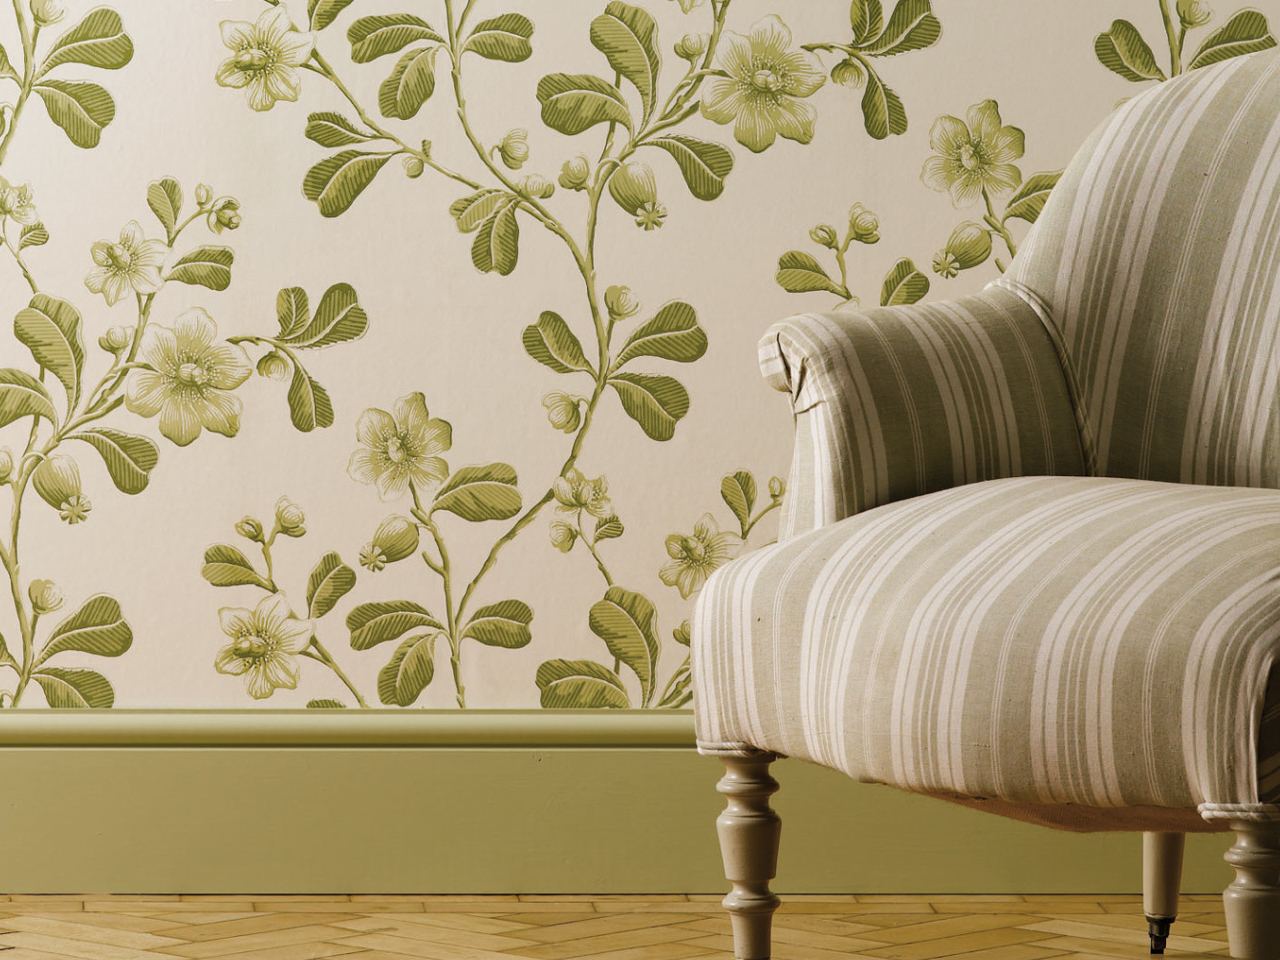 Escapology Launches Luxury Paint & Wallpaper Collections